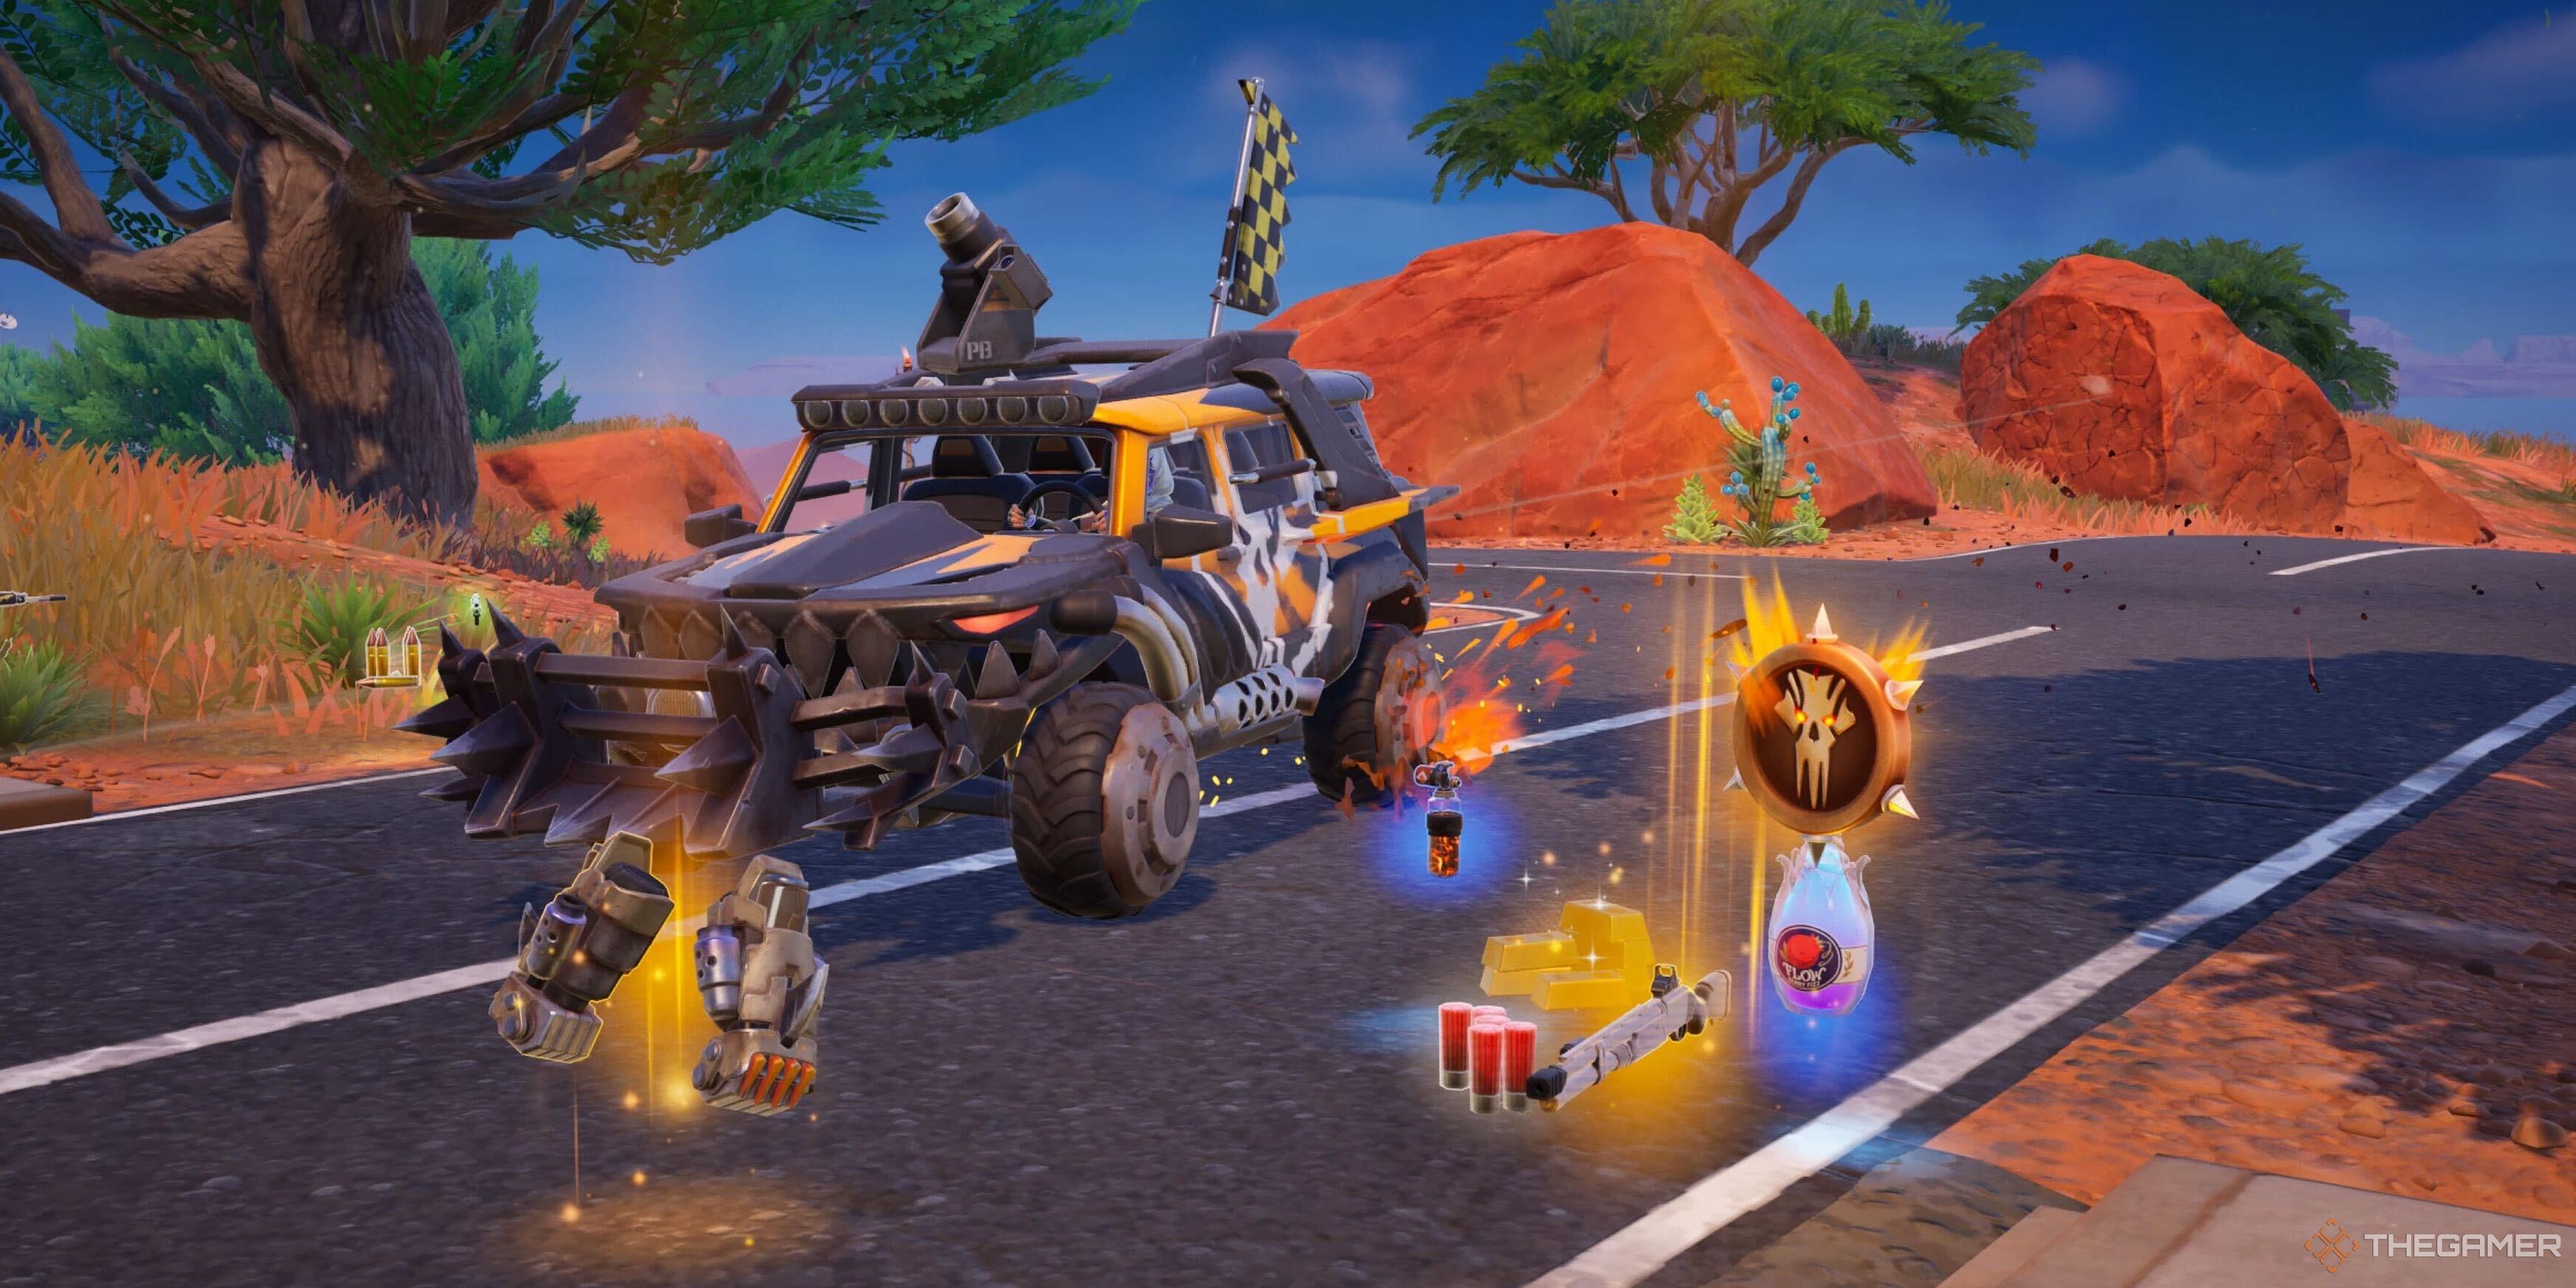 A black SUV with a cow catcher, cannon, and a black-and-yellow checkered flag. Gear like the Nitro Fists, a Medallion with a skull, and other gear can be seen on a road in a desert area.